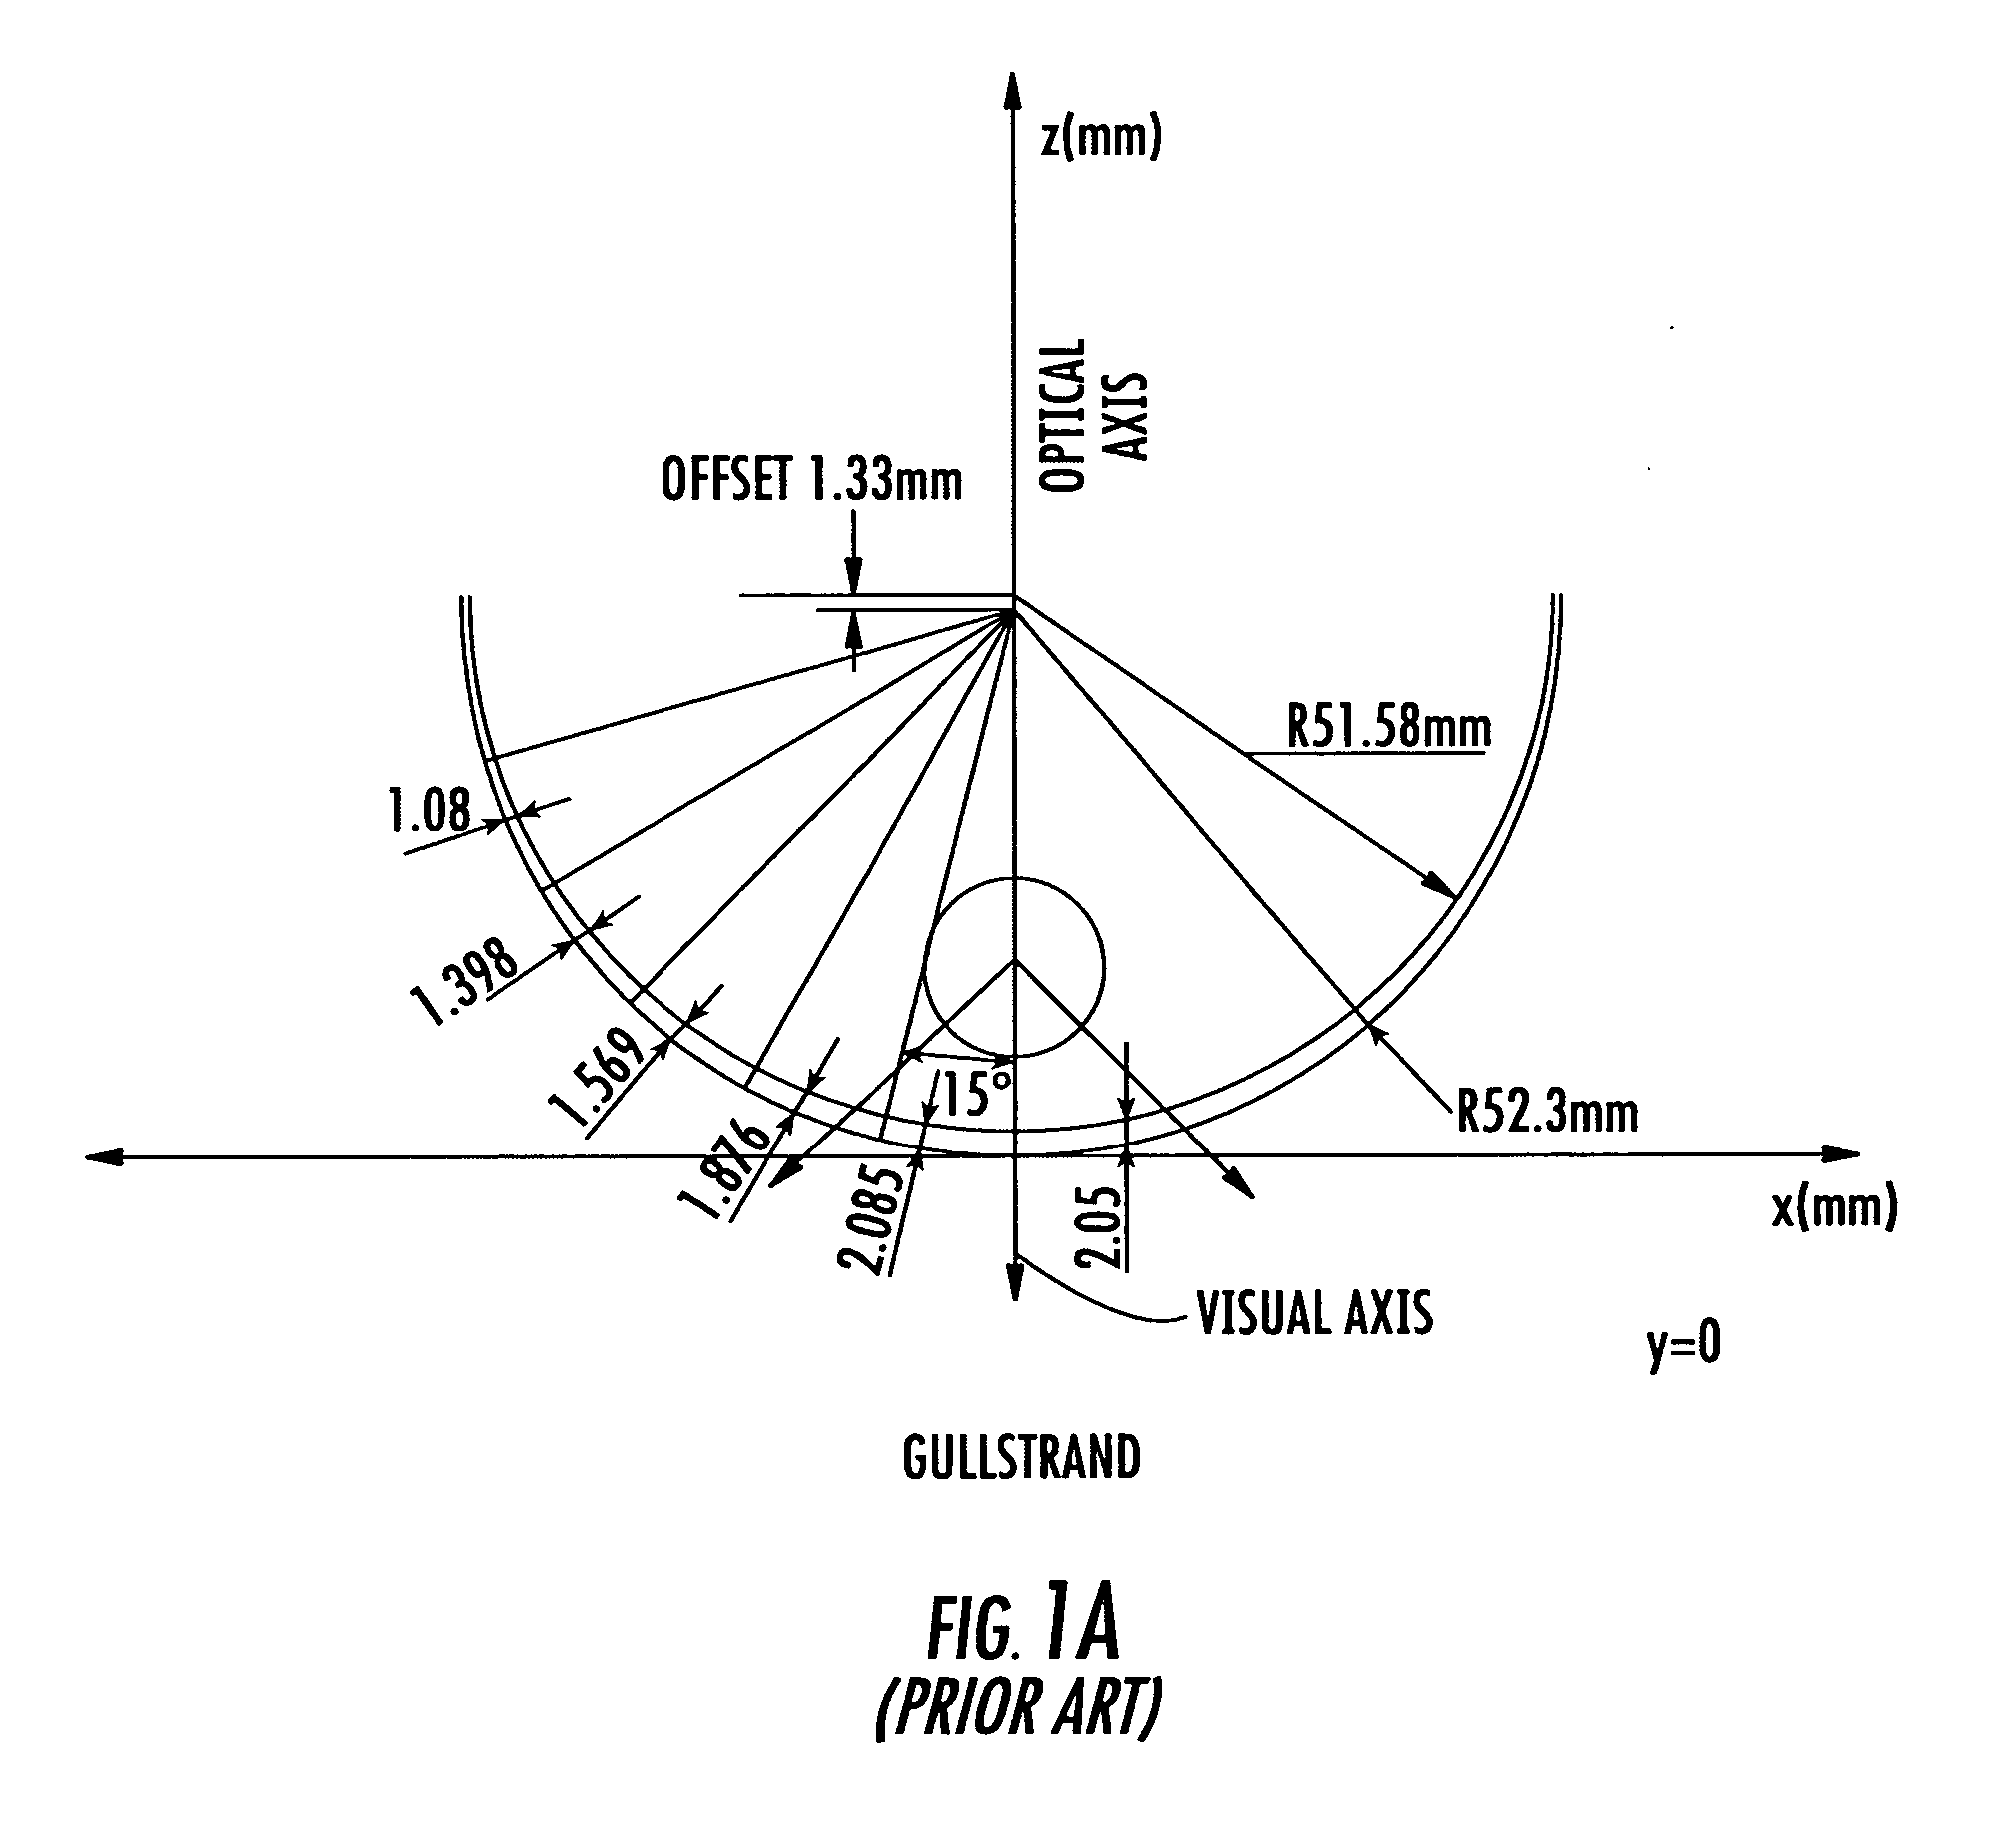 Non-corrective lenses with improved peripheral vision